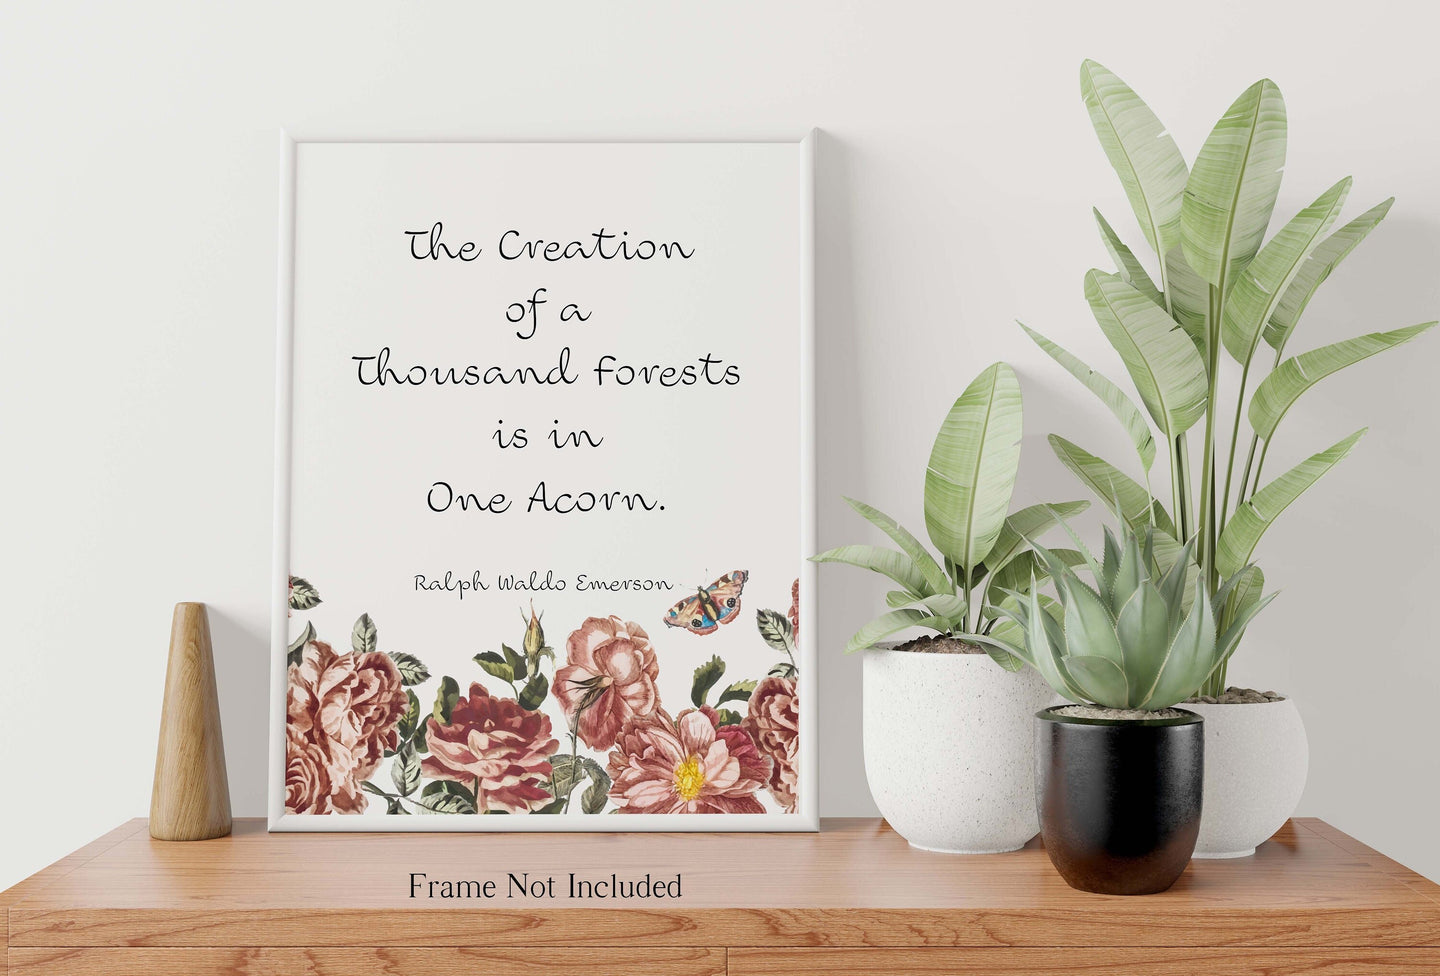 Emerson - The Creation of a Thousand Forests is in One Acorn Ralph Waldo Emerson Quote Poster Print